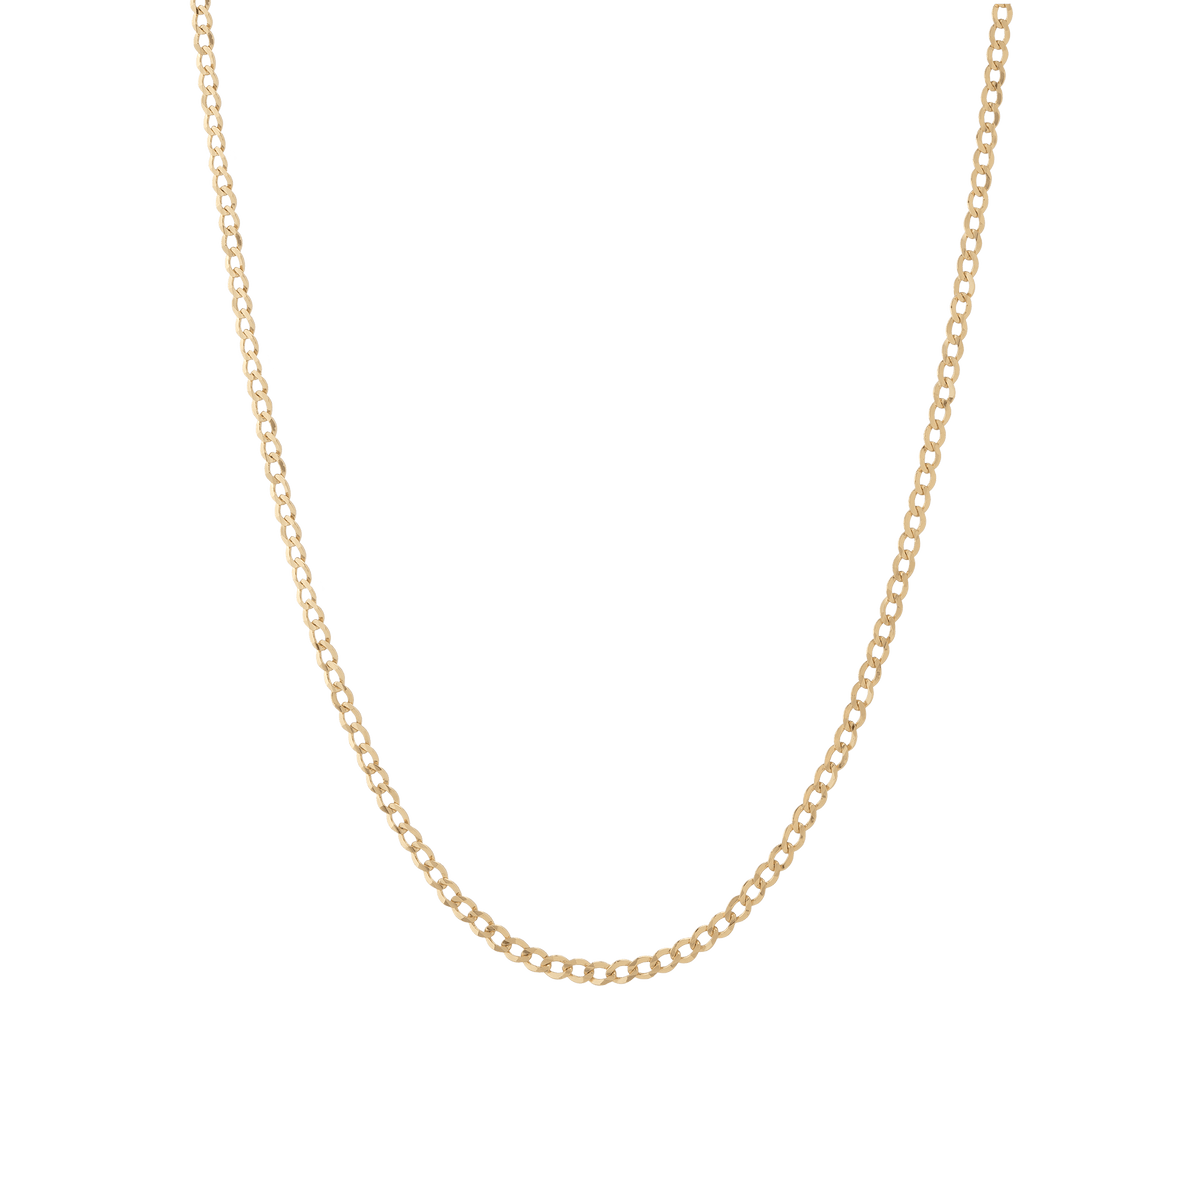 Welry Men's 5.1mm Beveled Curb Chain Necklace in 14K Yellow Gold | Welry